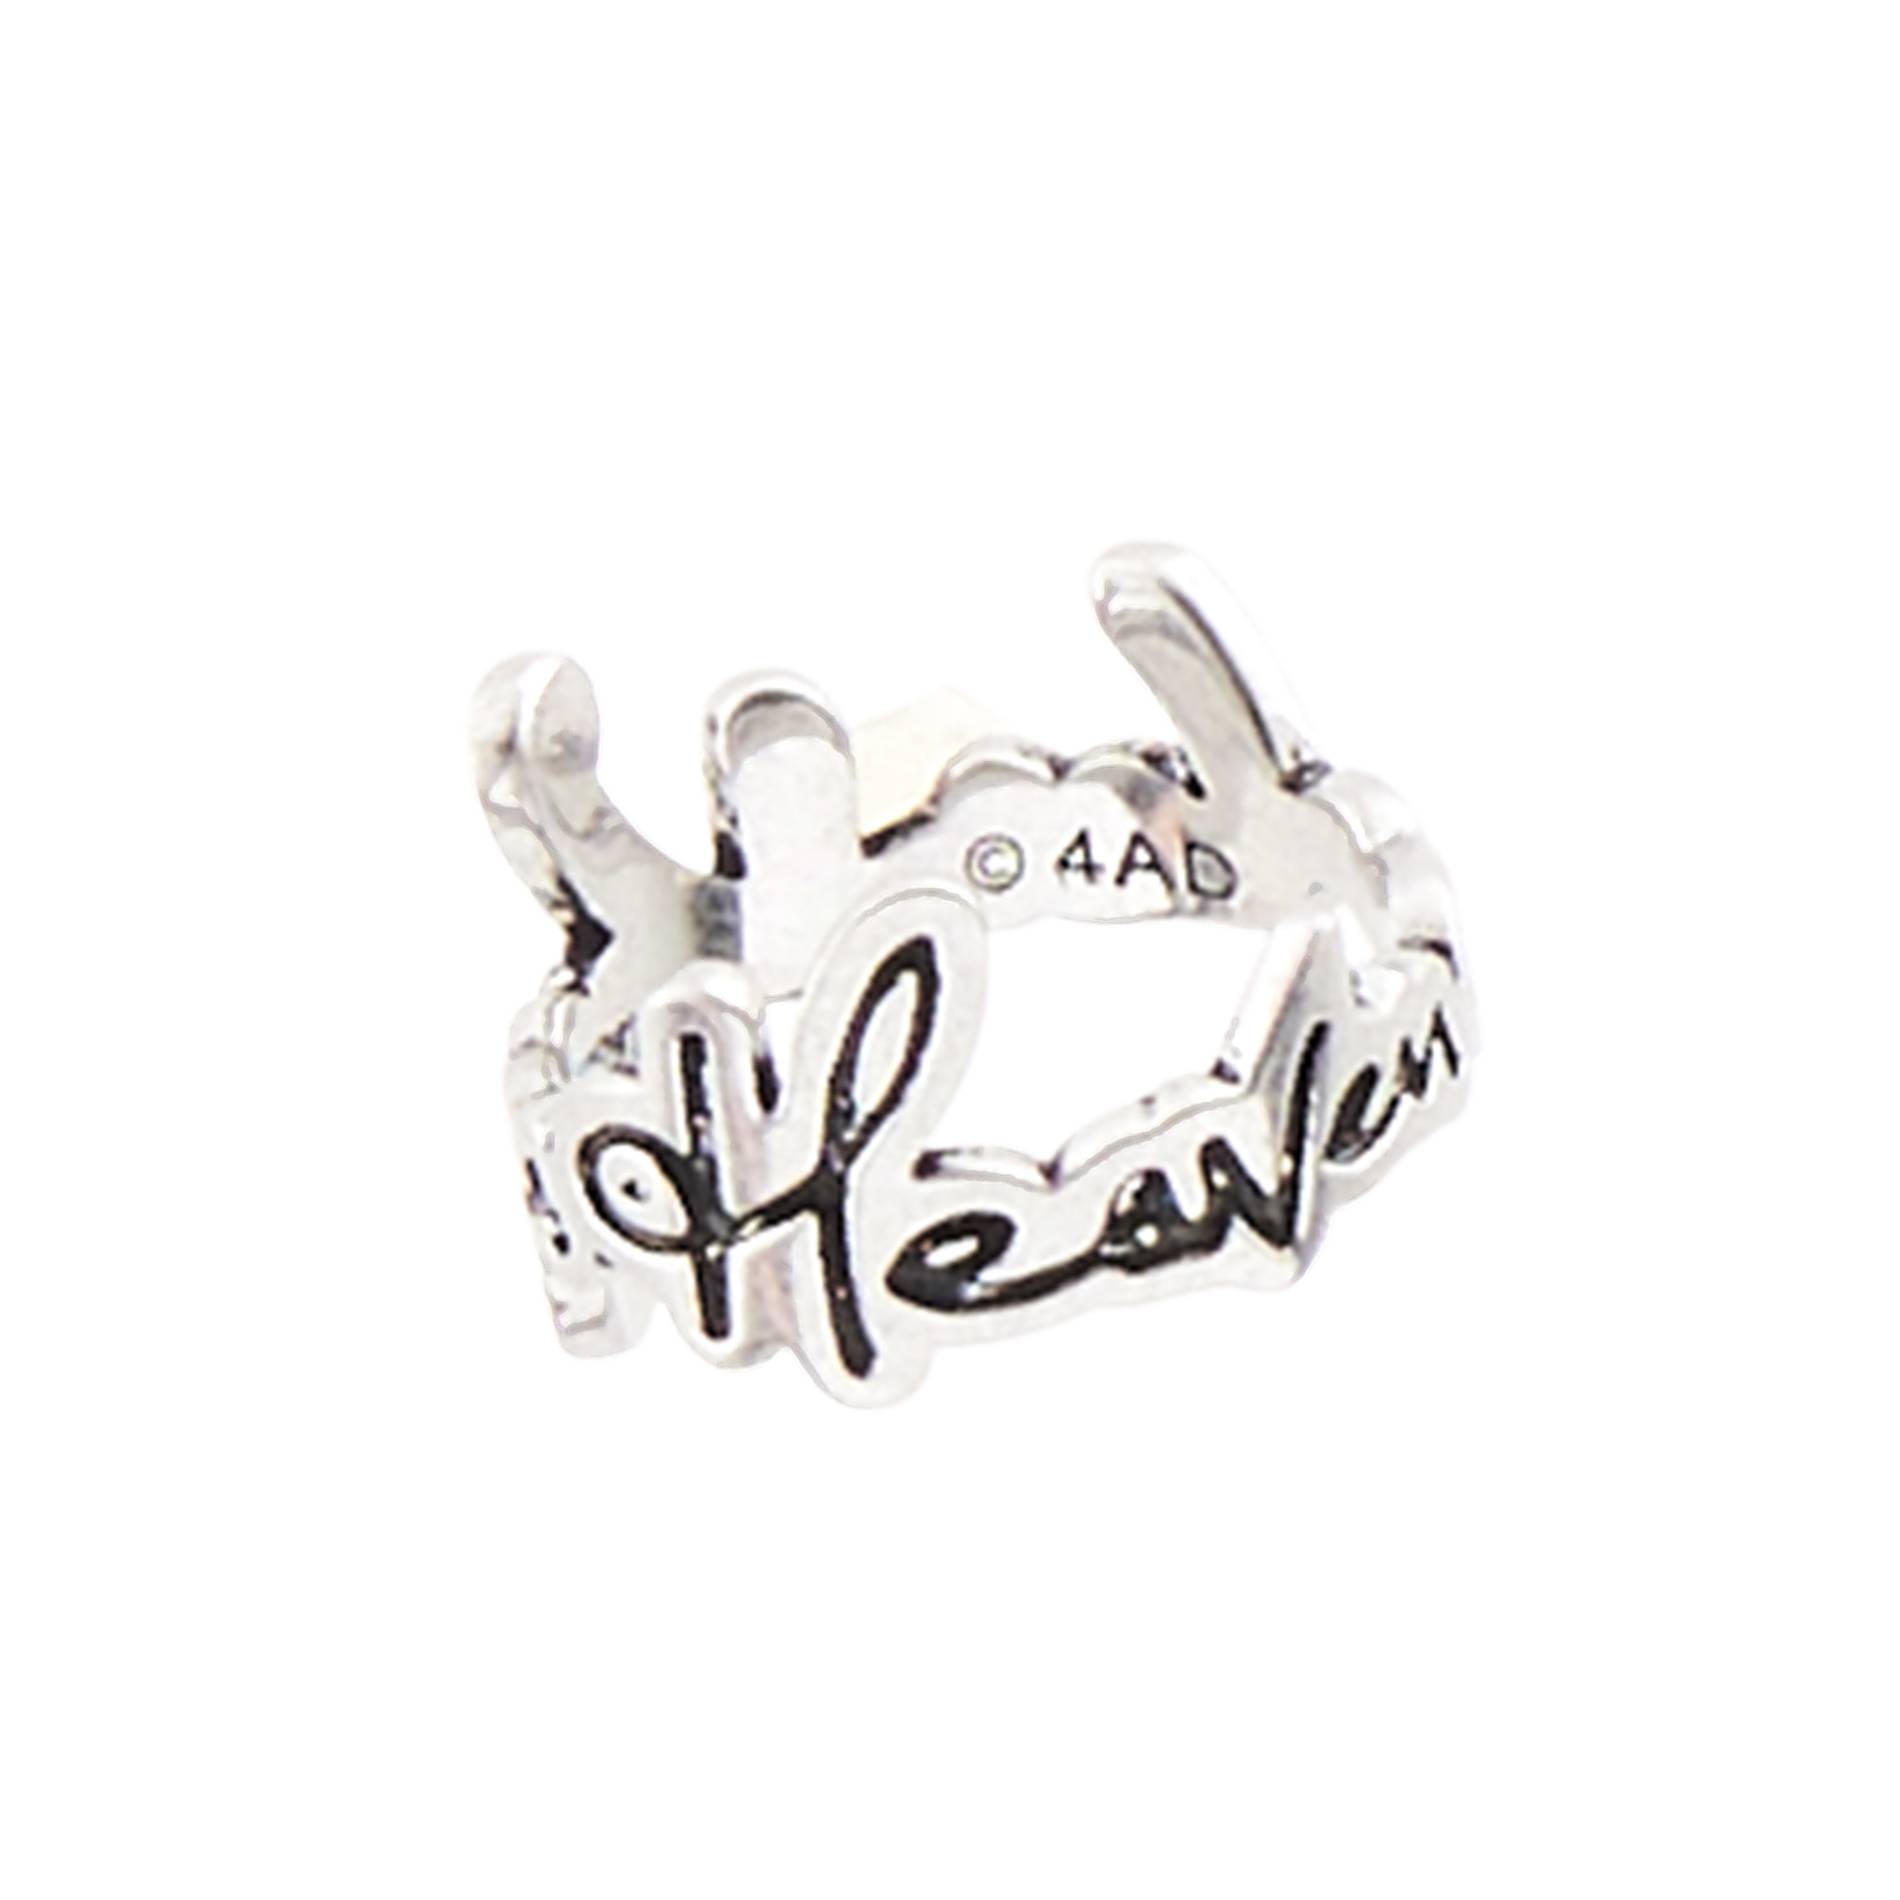 Marc Jacobs Heaven or Las Vegas collection; ring